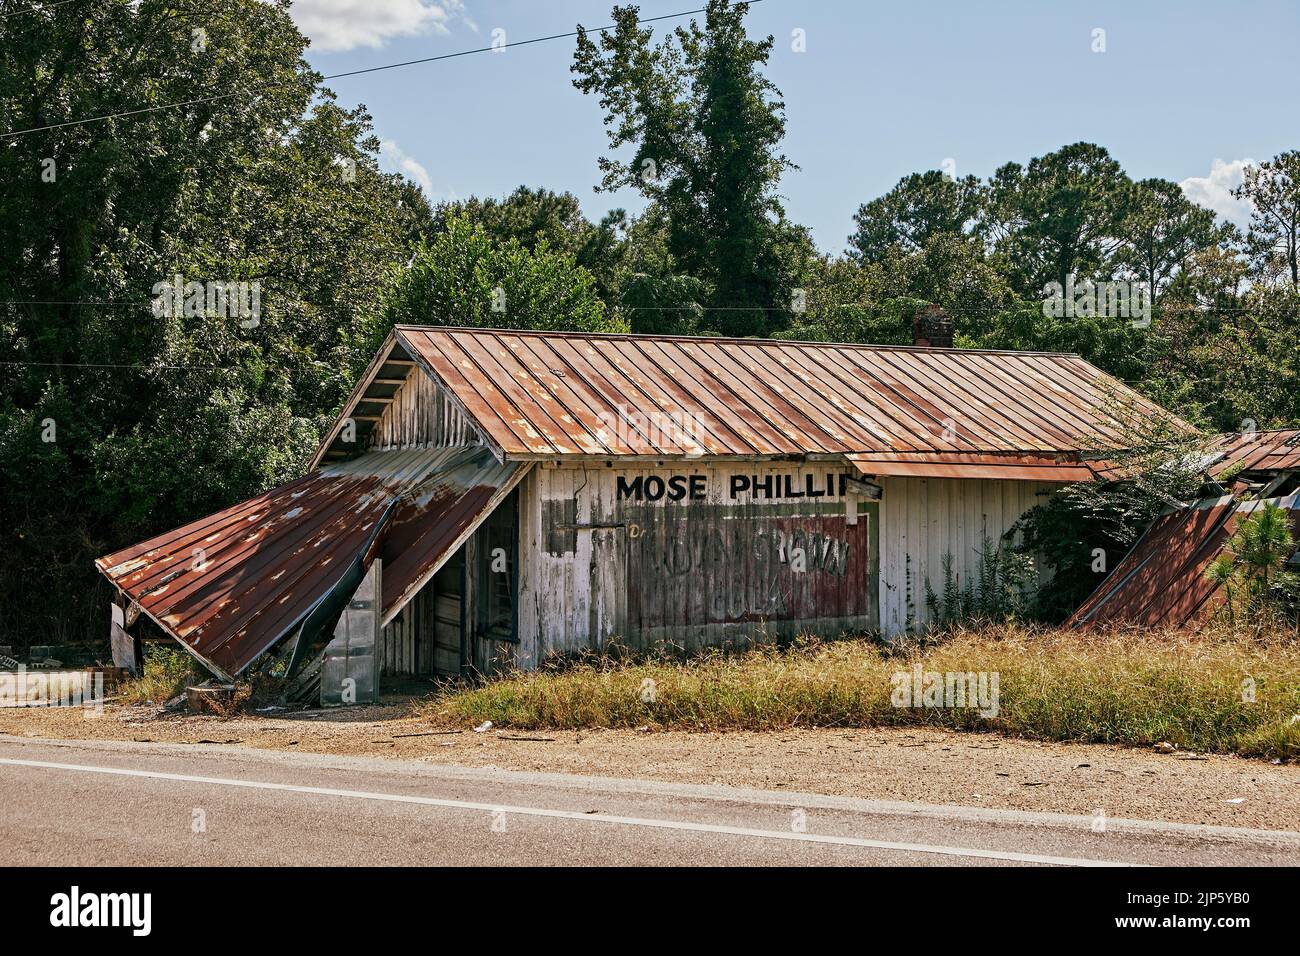 Rustic collapsing or dilapidated old building with a rusting metal roof in rural Smuteye Alabama, USA. Stock Photo